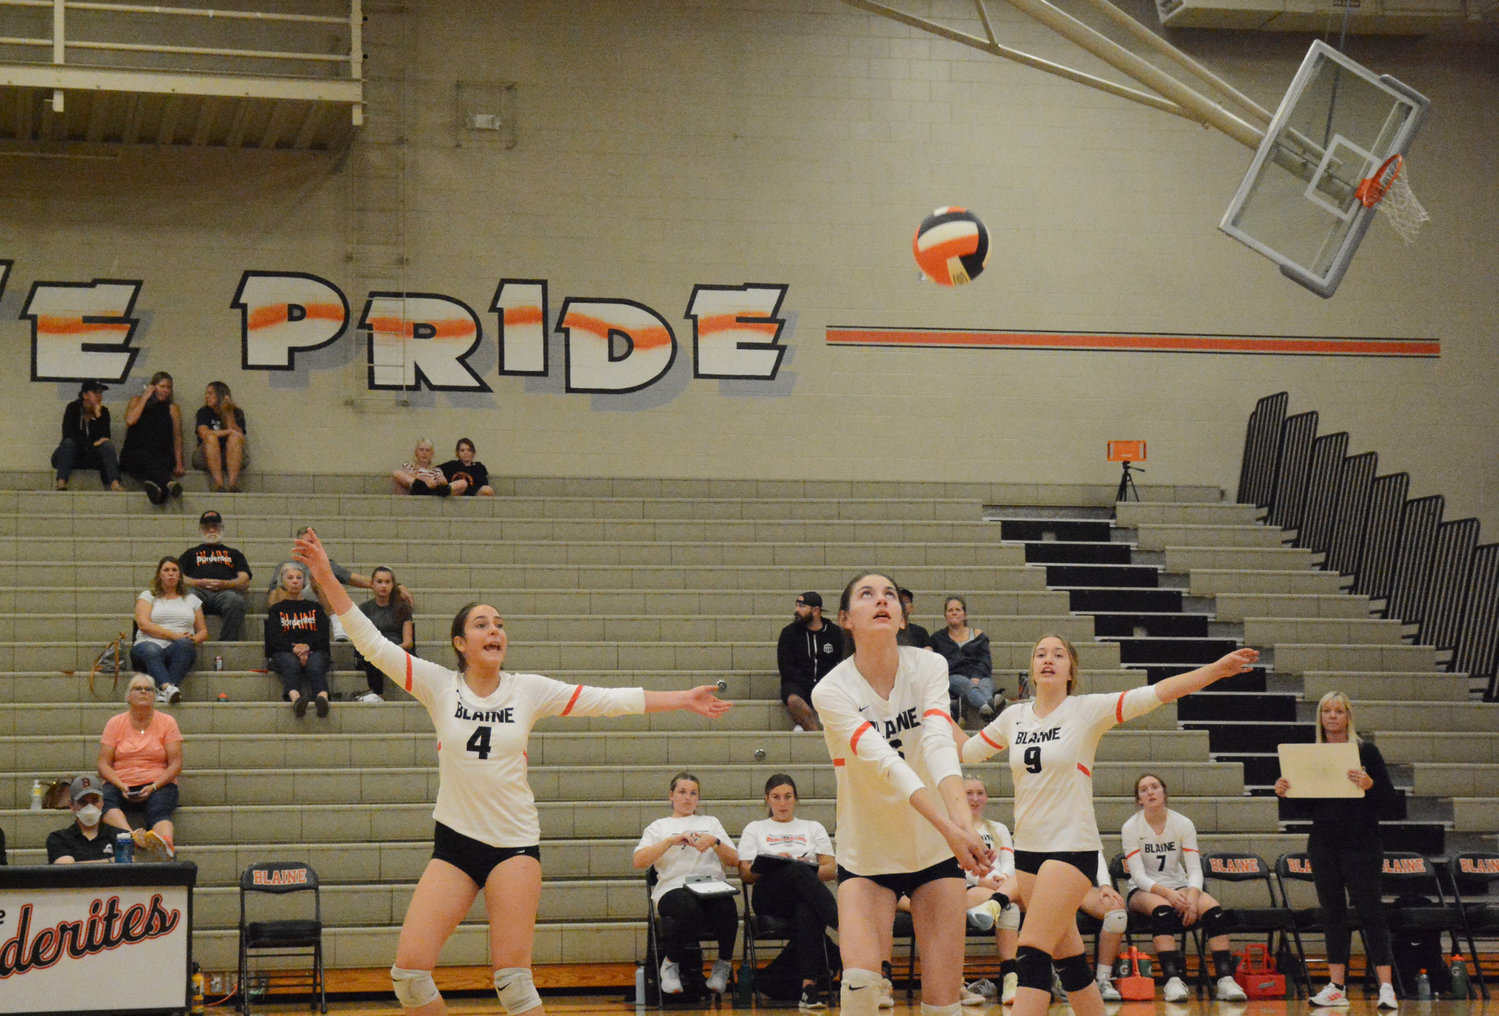 Kaitlyn Harrington looks to bump the ball over the net as teammates Gillian Rea and Brie Smith offer some encouragement. Blaine girls volleyball lost to Lynden in three straight sets September 20 in the Blaine High School gymnasium.